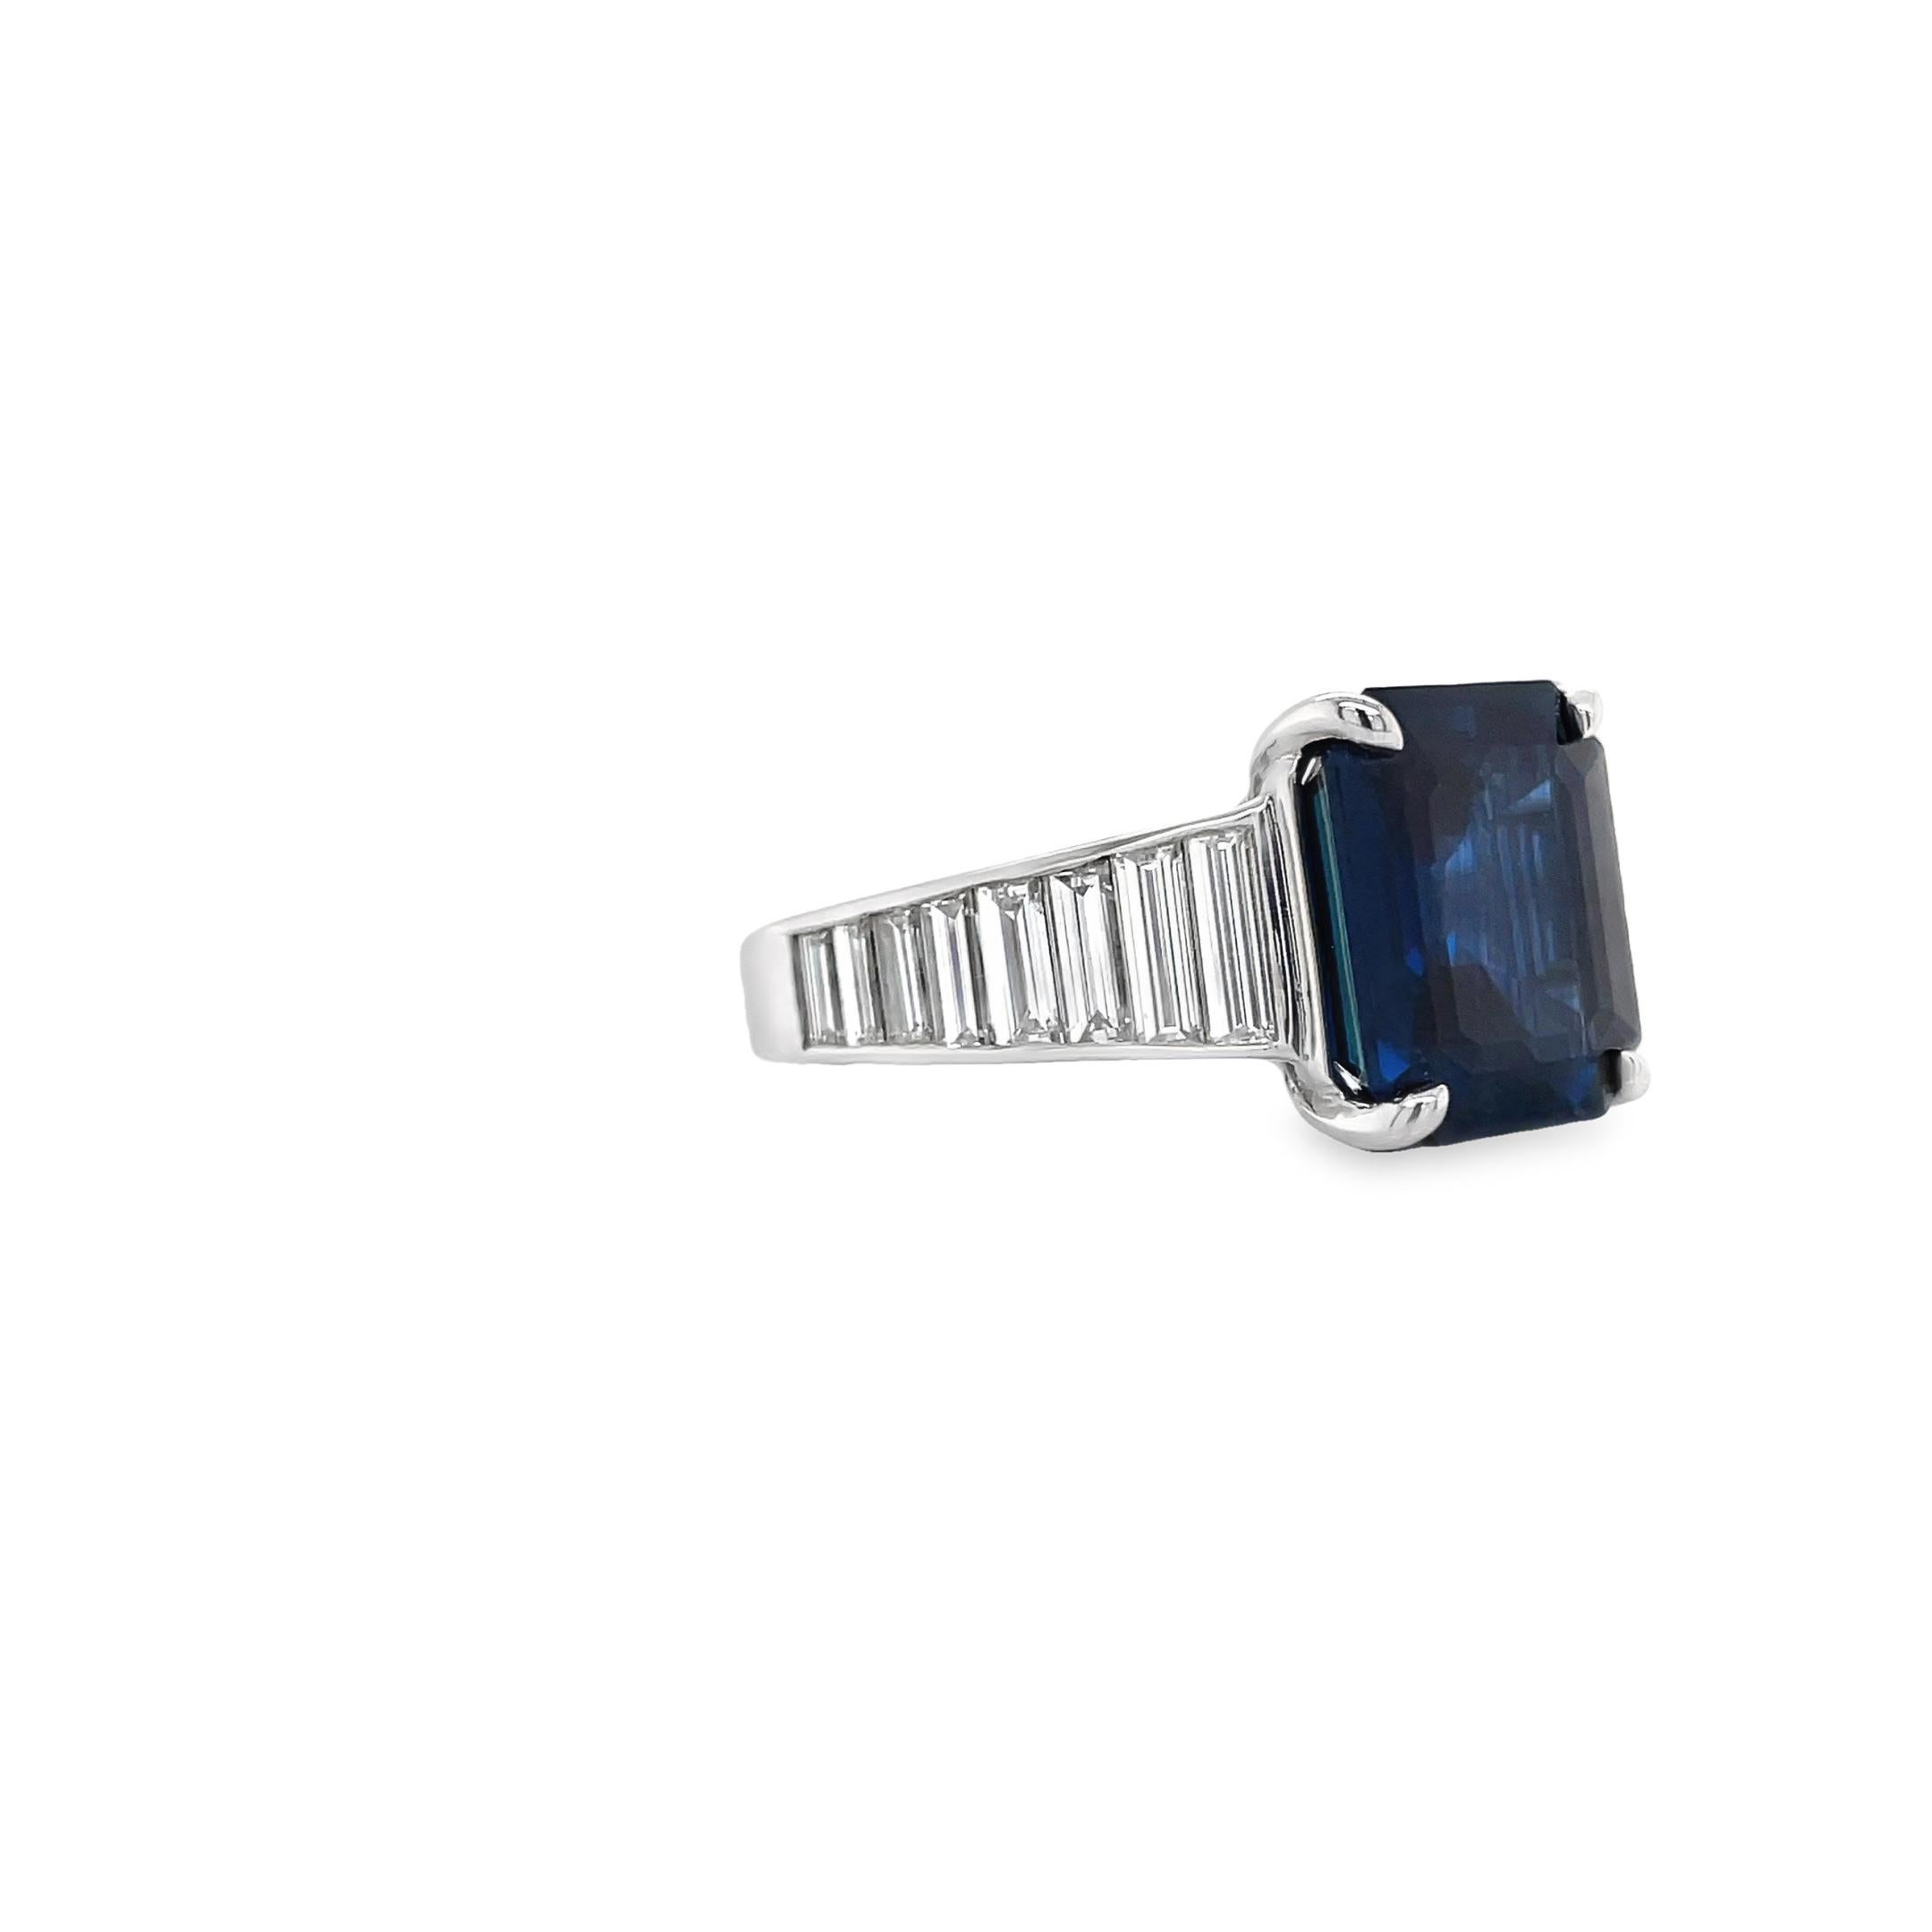 Ring contains one center emerald shape sapphire weighing 7.75ct. Center stone is accented by graduating side tapered baguette diamonds weighing a total of 1.75cts. Center sapphire is GIA certified and has no heat treatment. Sapphire and diamonds are